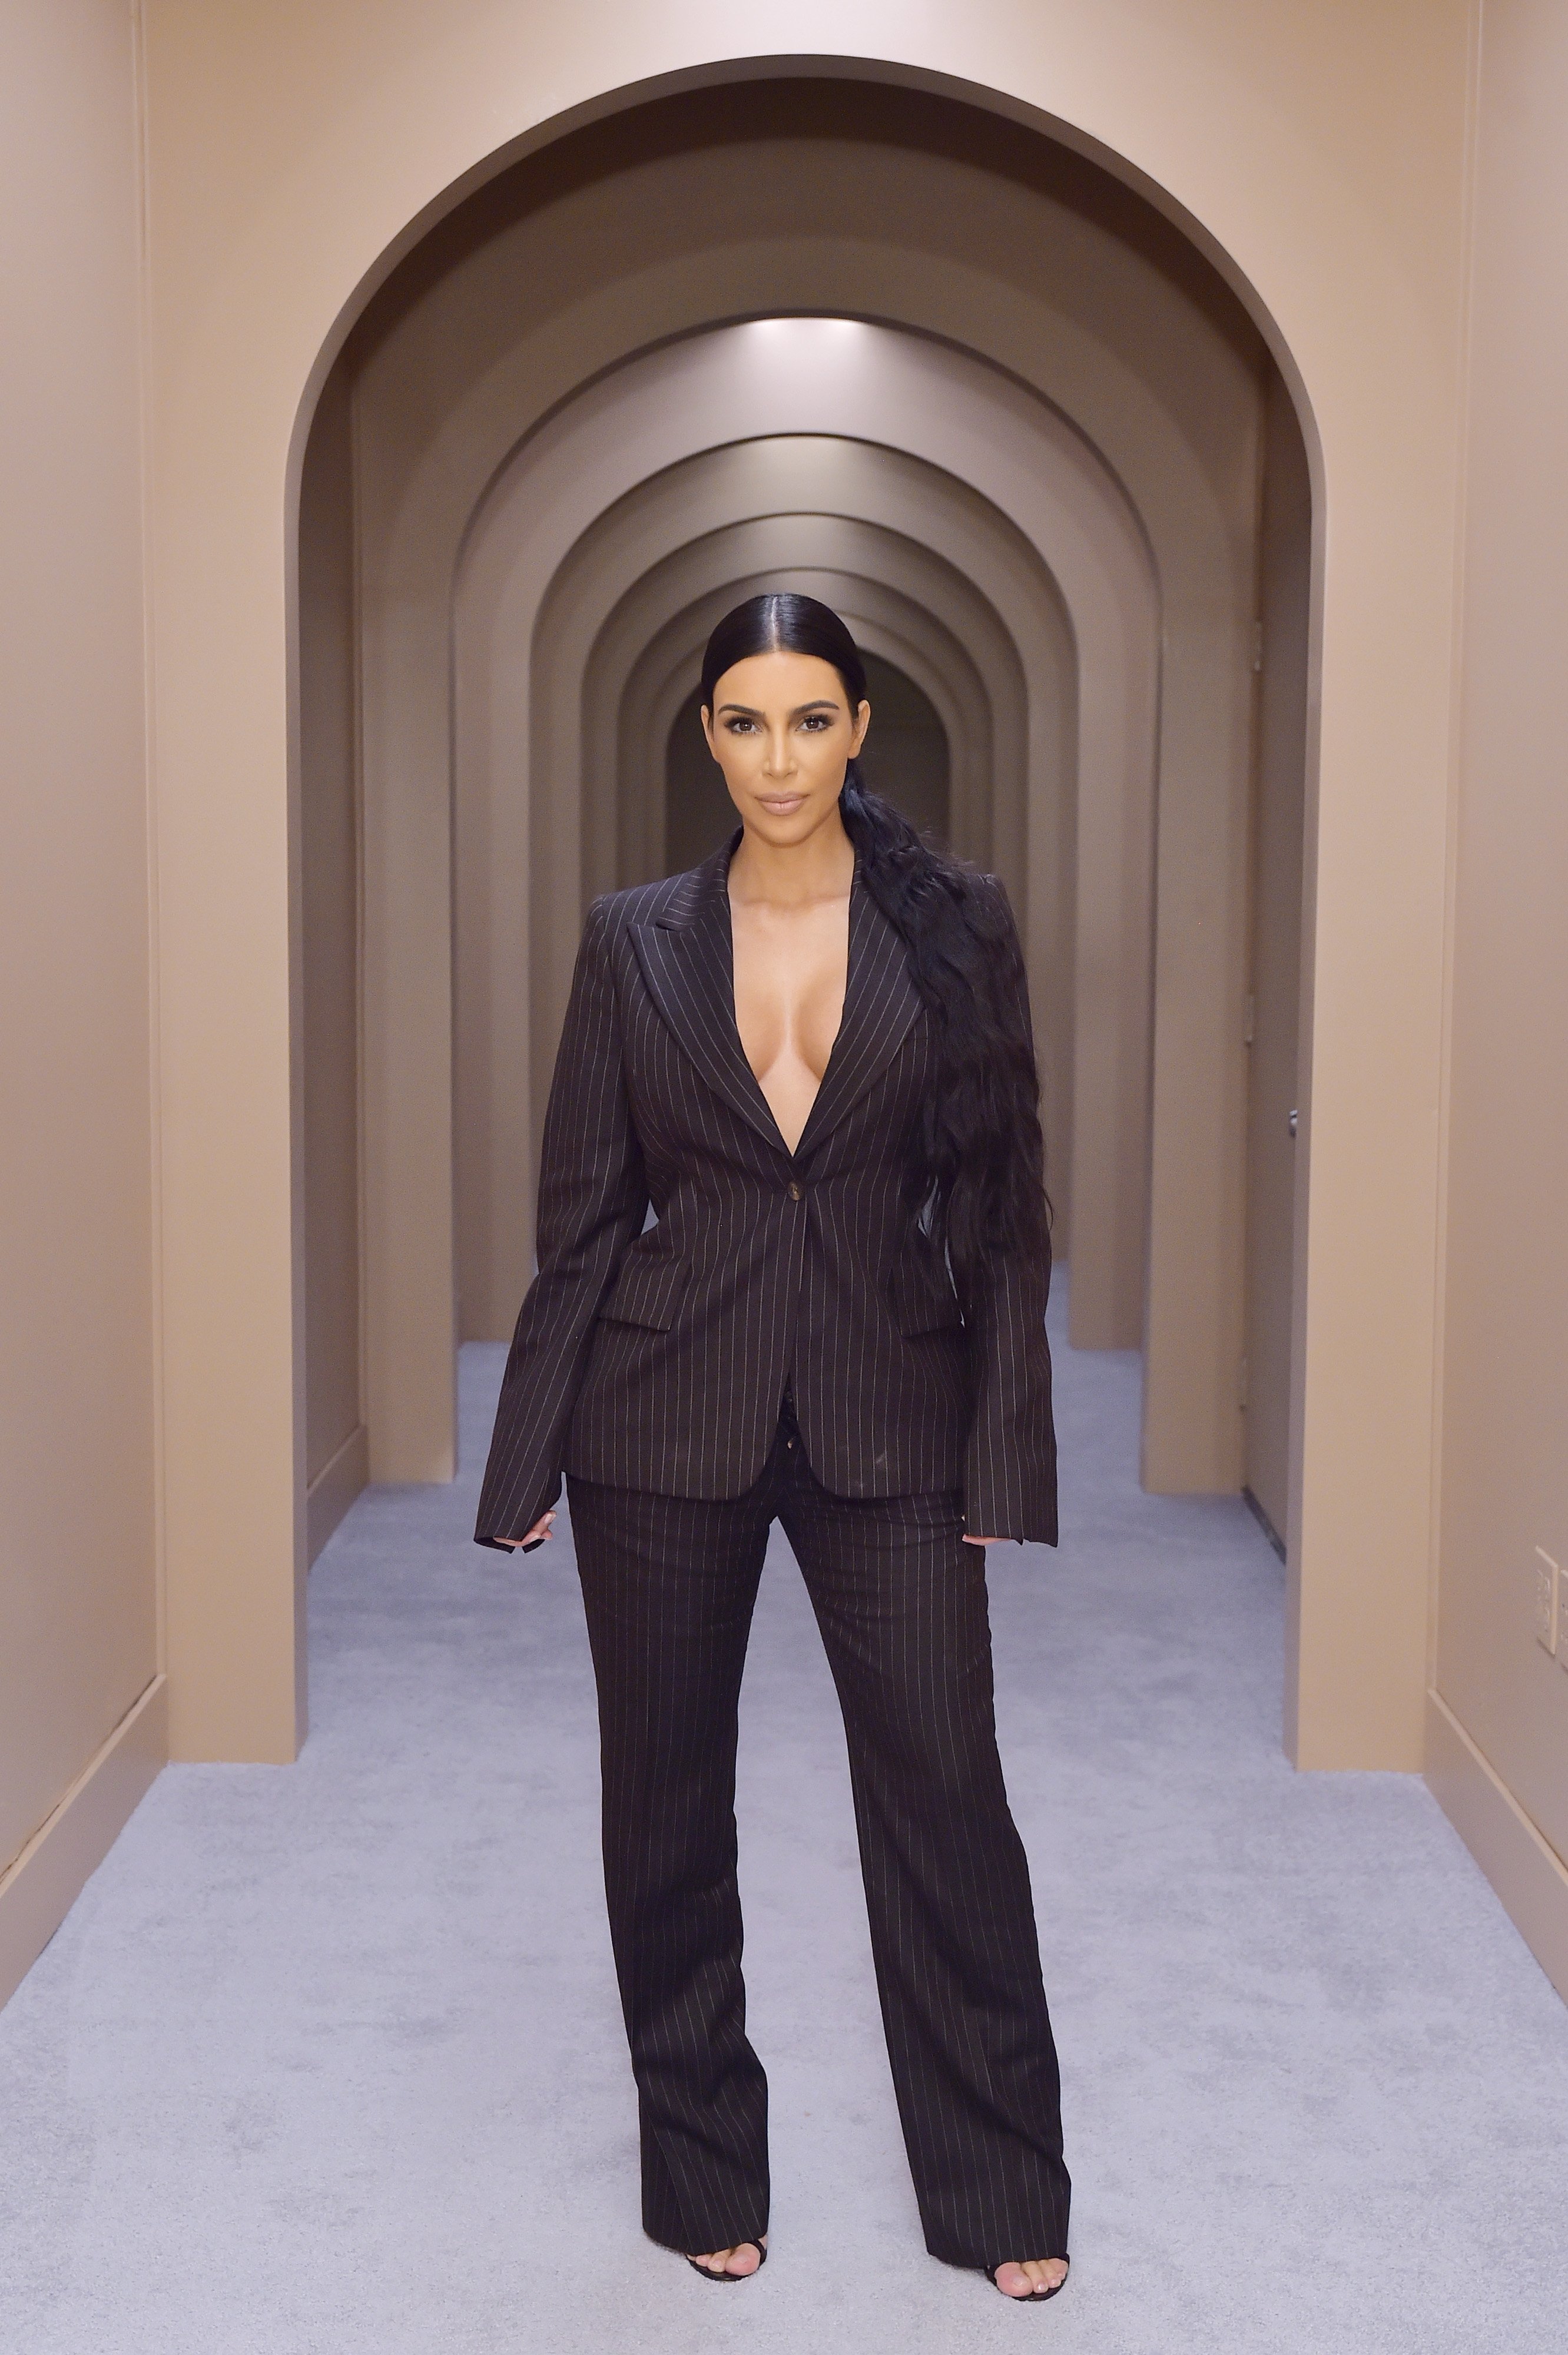 Kim Kardashian attends the KKW Beauty Pop-Up in Costa Mesa, California on December 4, 2018 | Photo: Getty Images